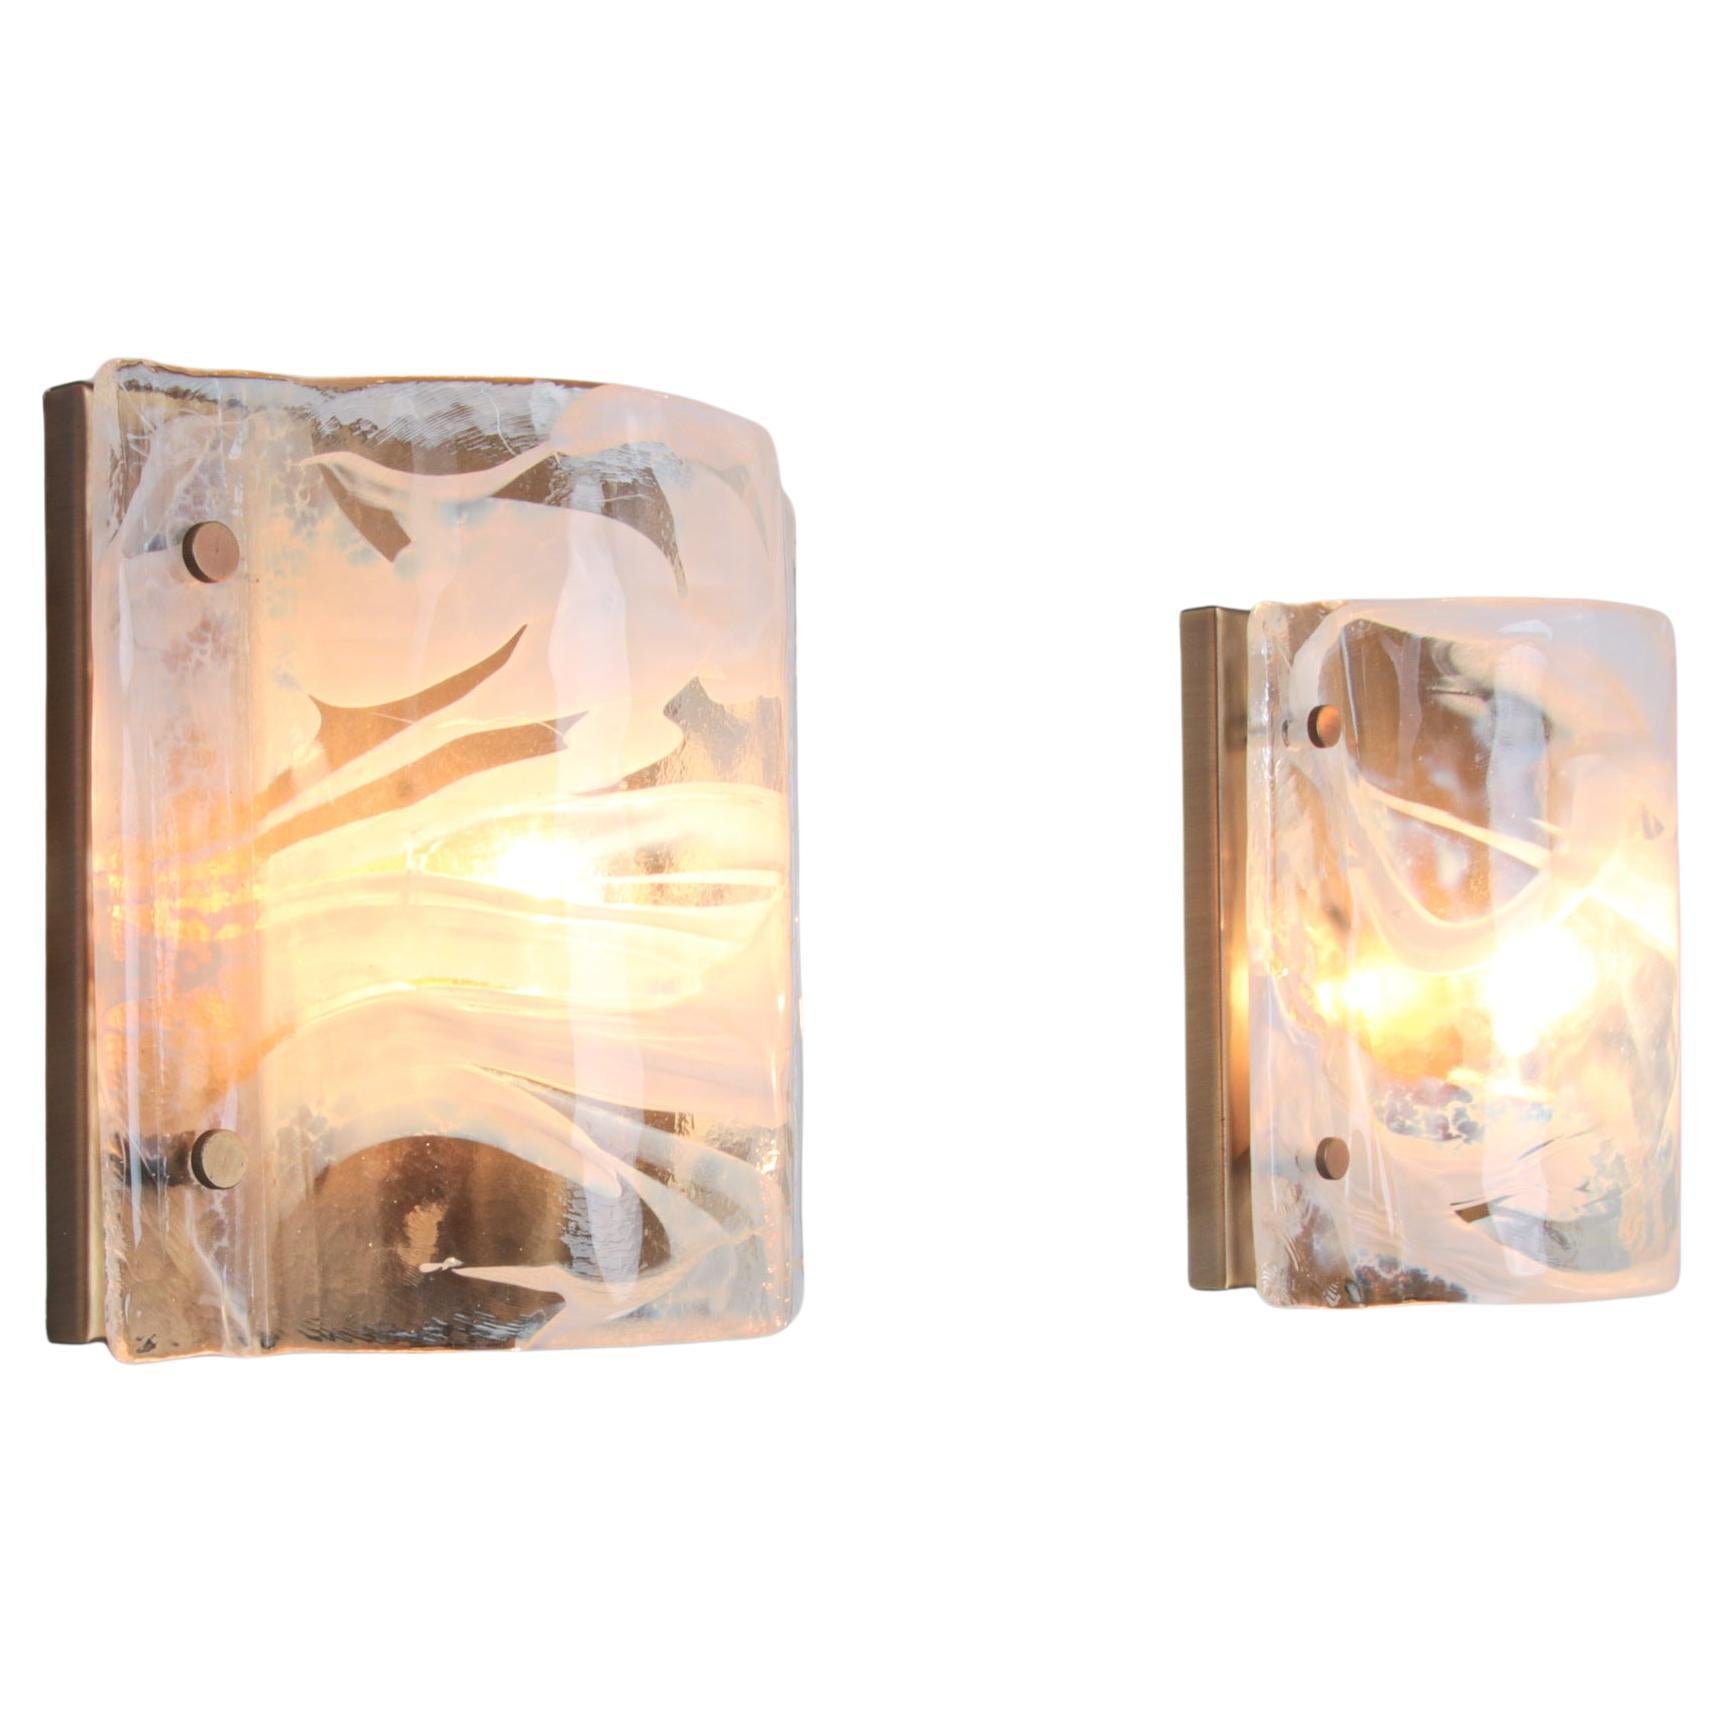 Pair of Vintage Hillebrand Wall Sconces in Murano Glass, Germany 1960s For Sale